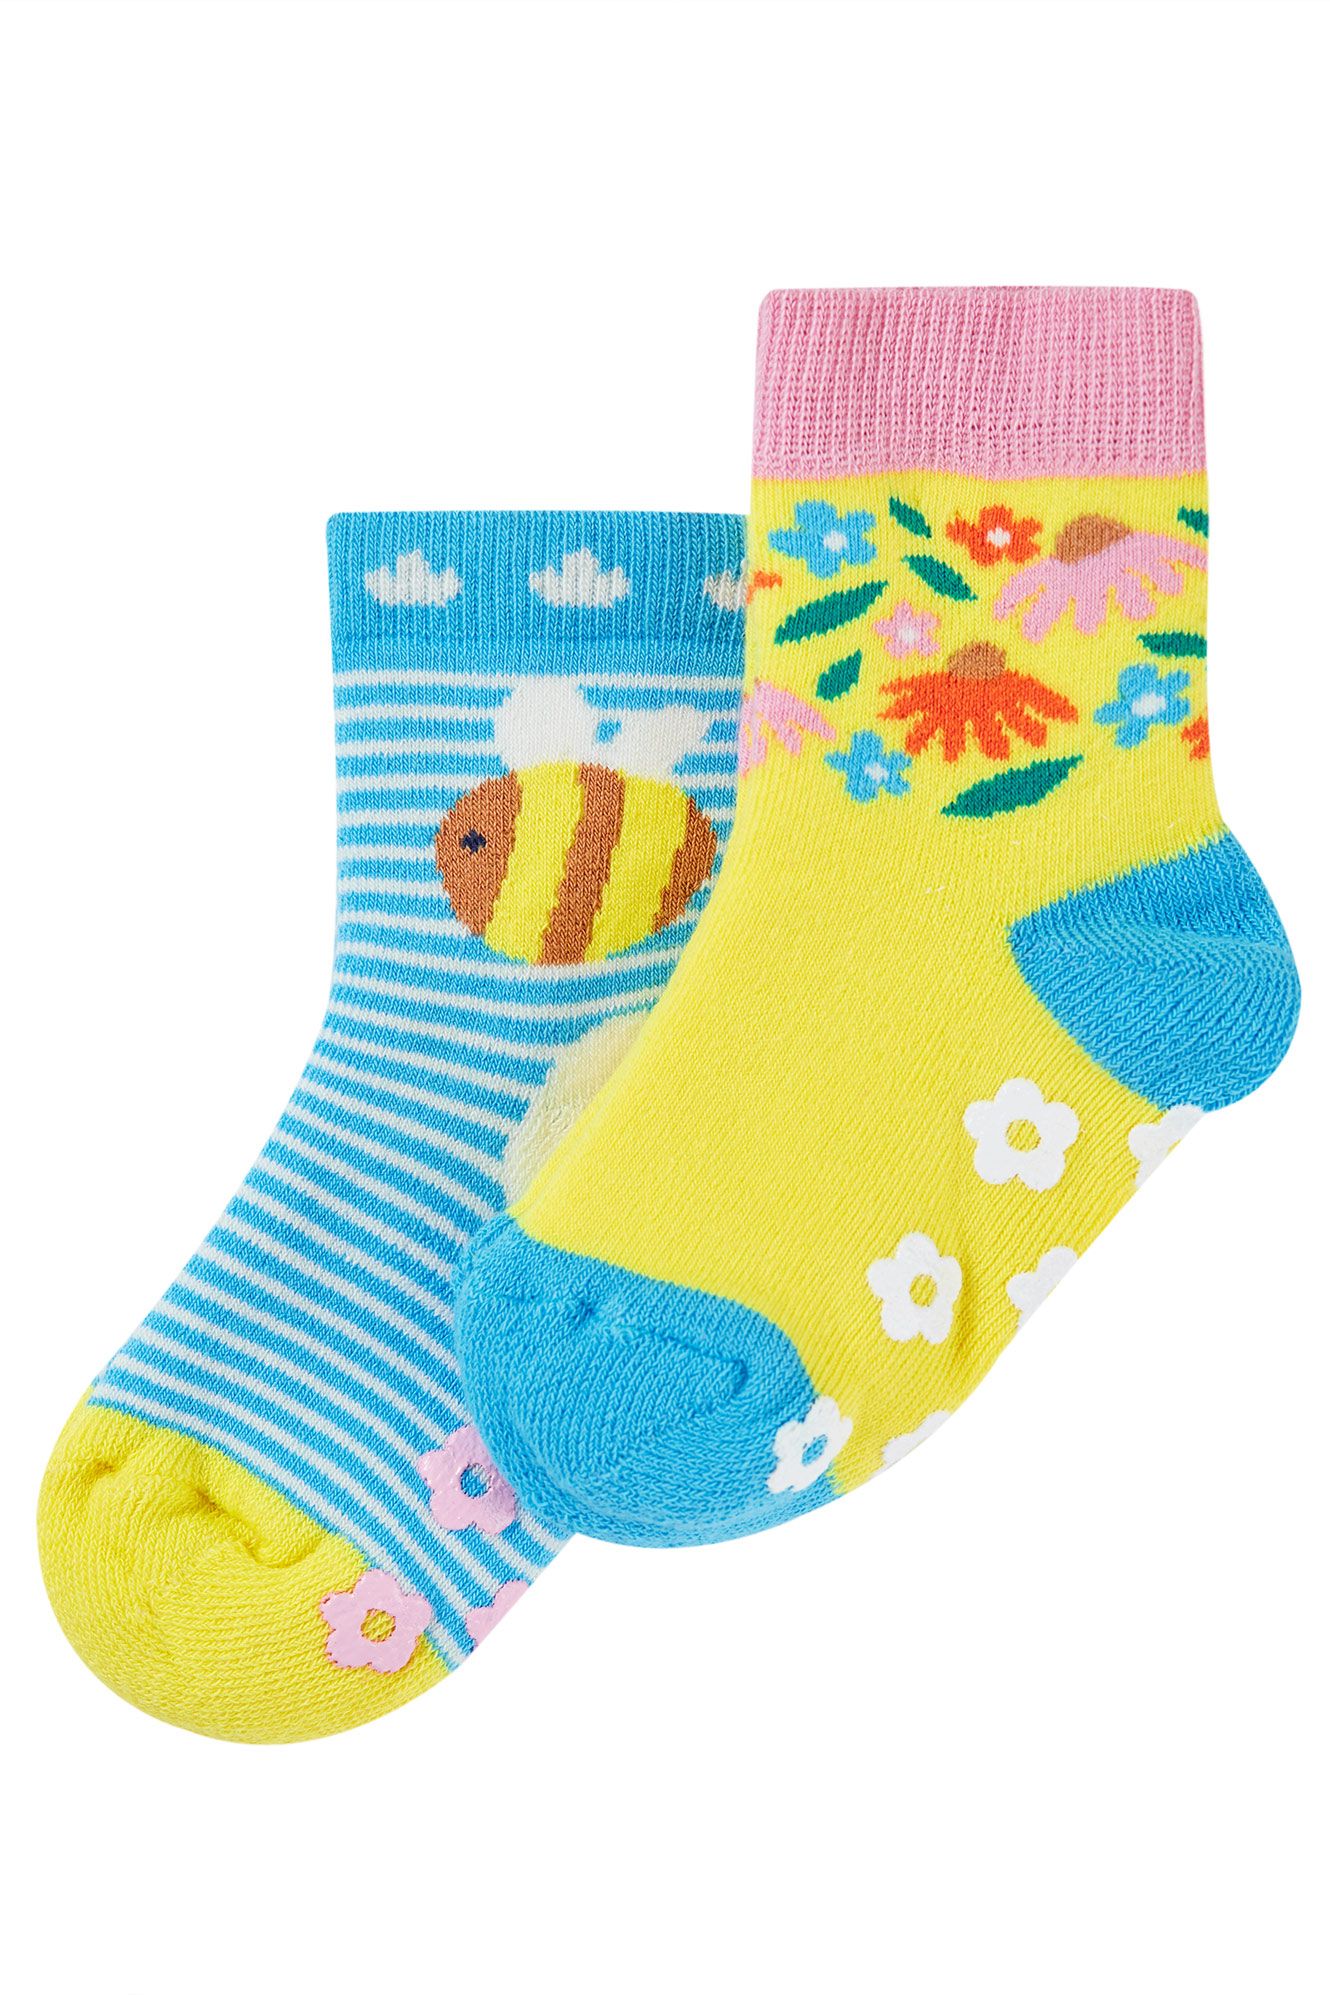 Get Your Child Into the Wild - Little Yoga Socks